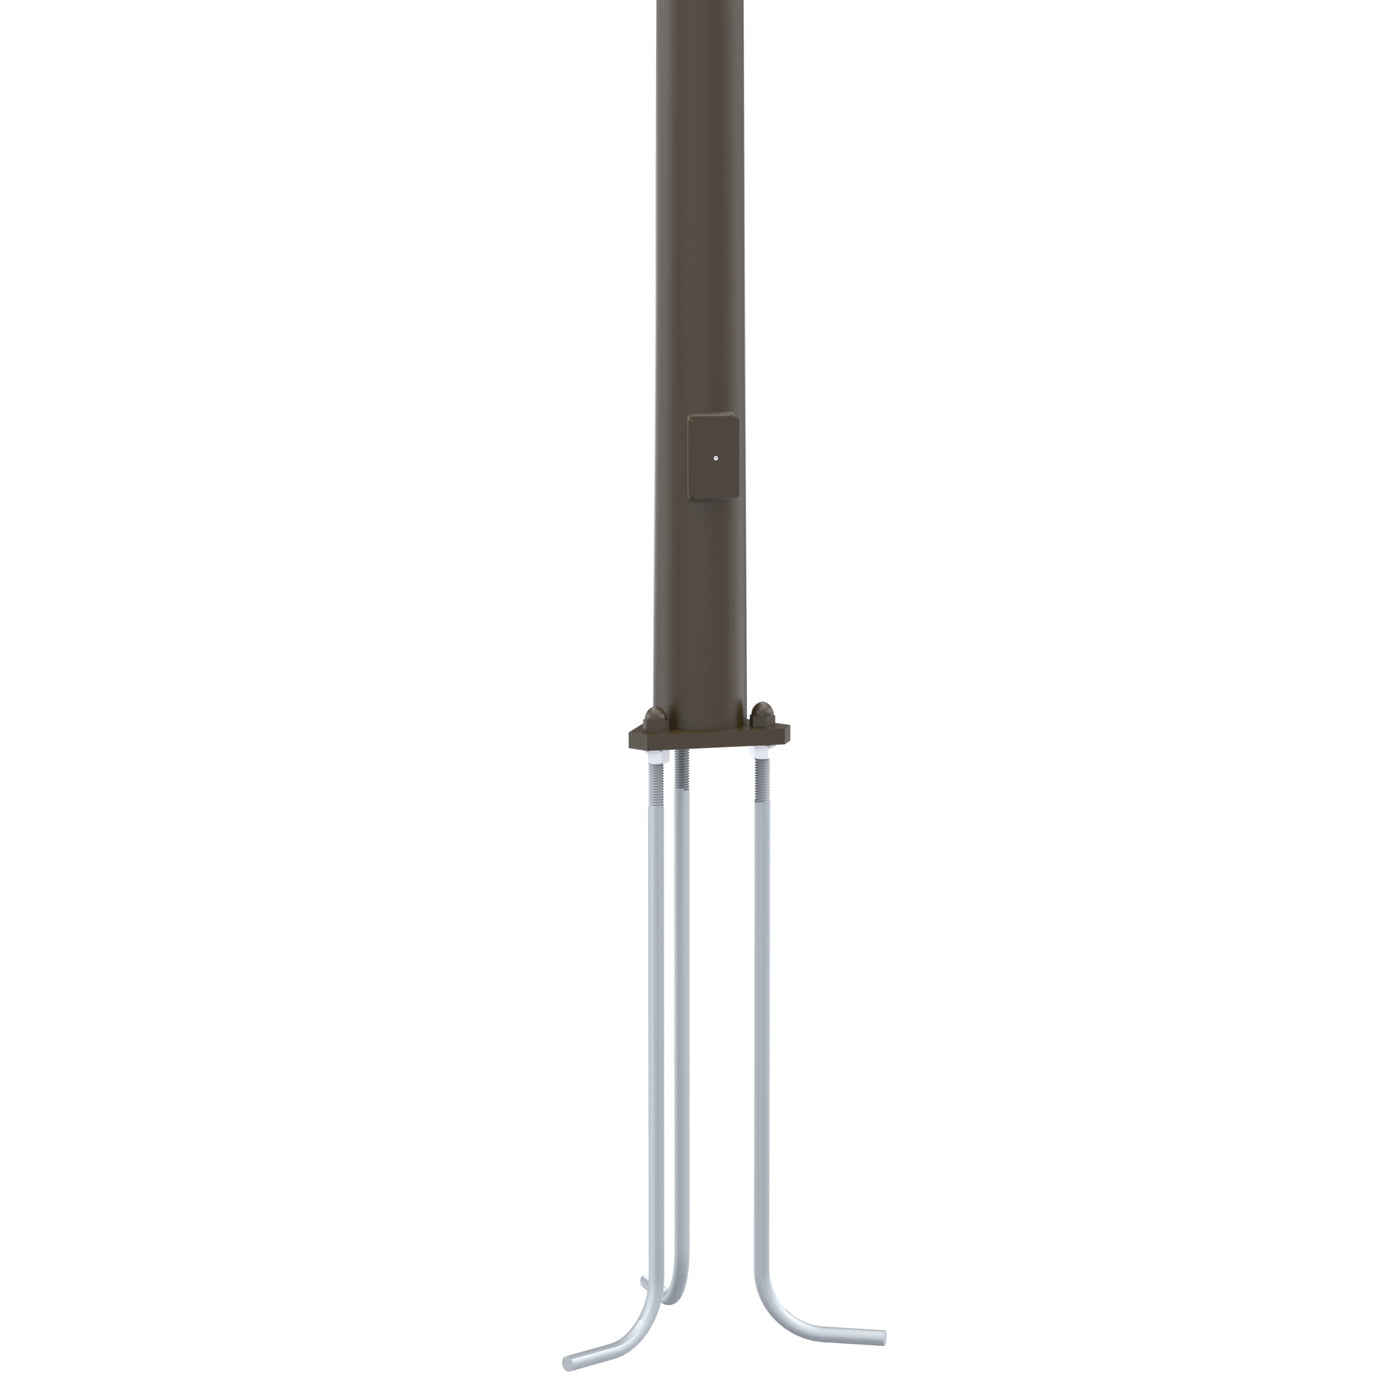 Round Tapered Steel 3-Bolt Base Light Pole with Anchor Bolts